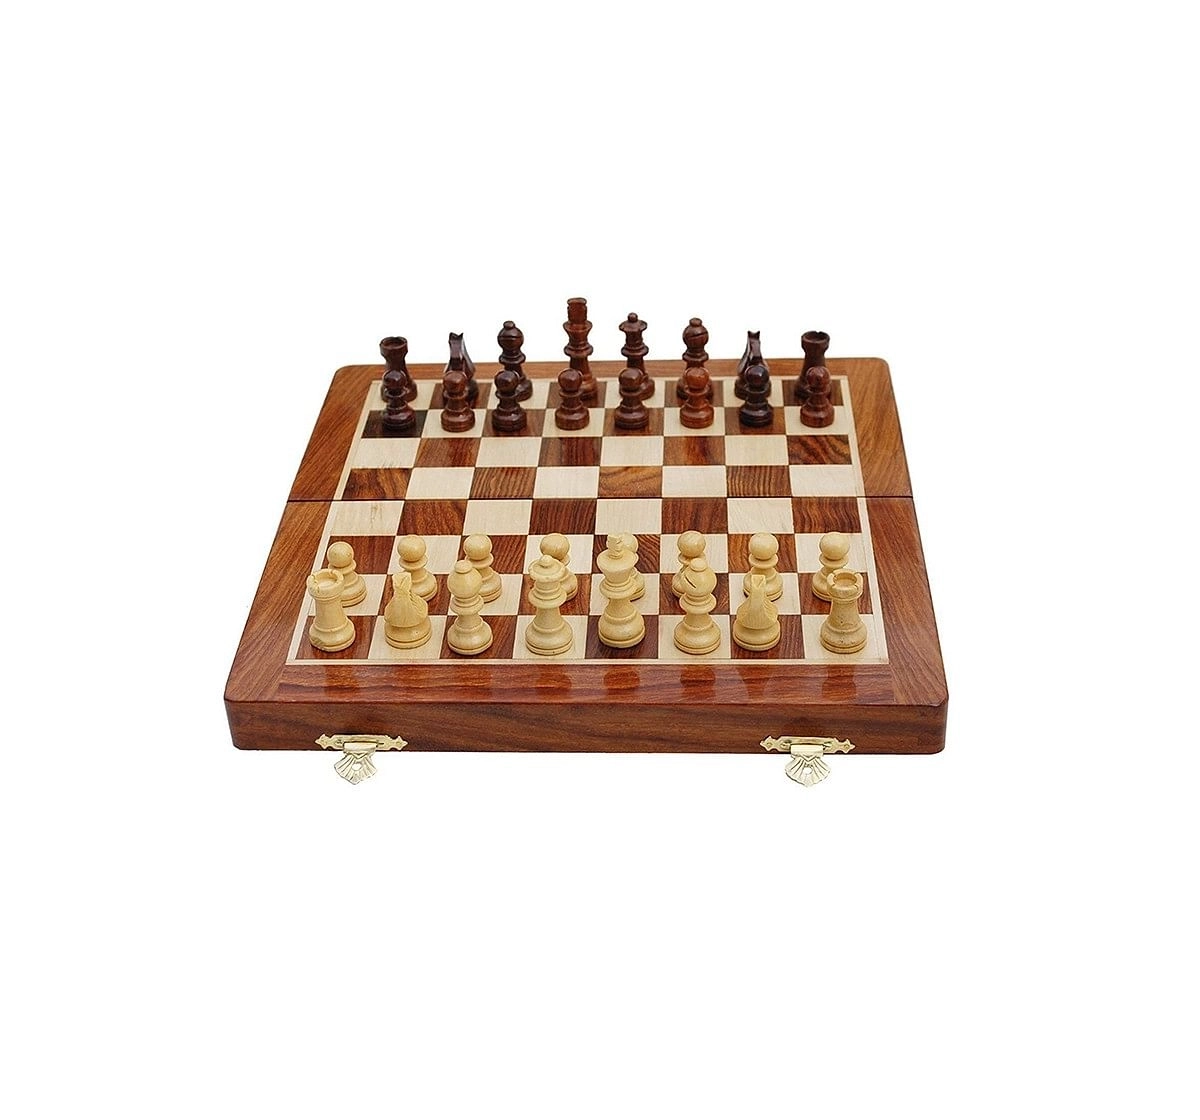 Craft & Culture Sqr Magentic Chess Foamed Tray 7" for Kids age 6Y+ (Wood)